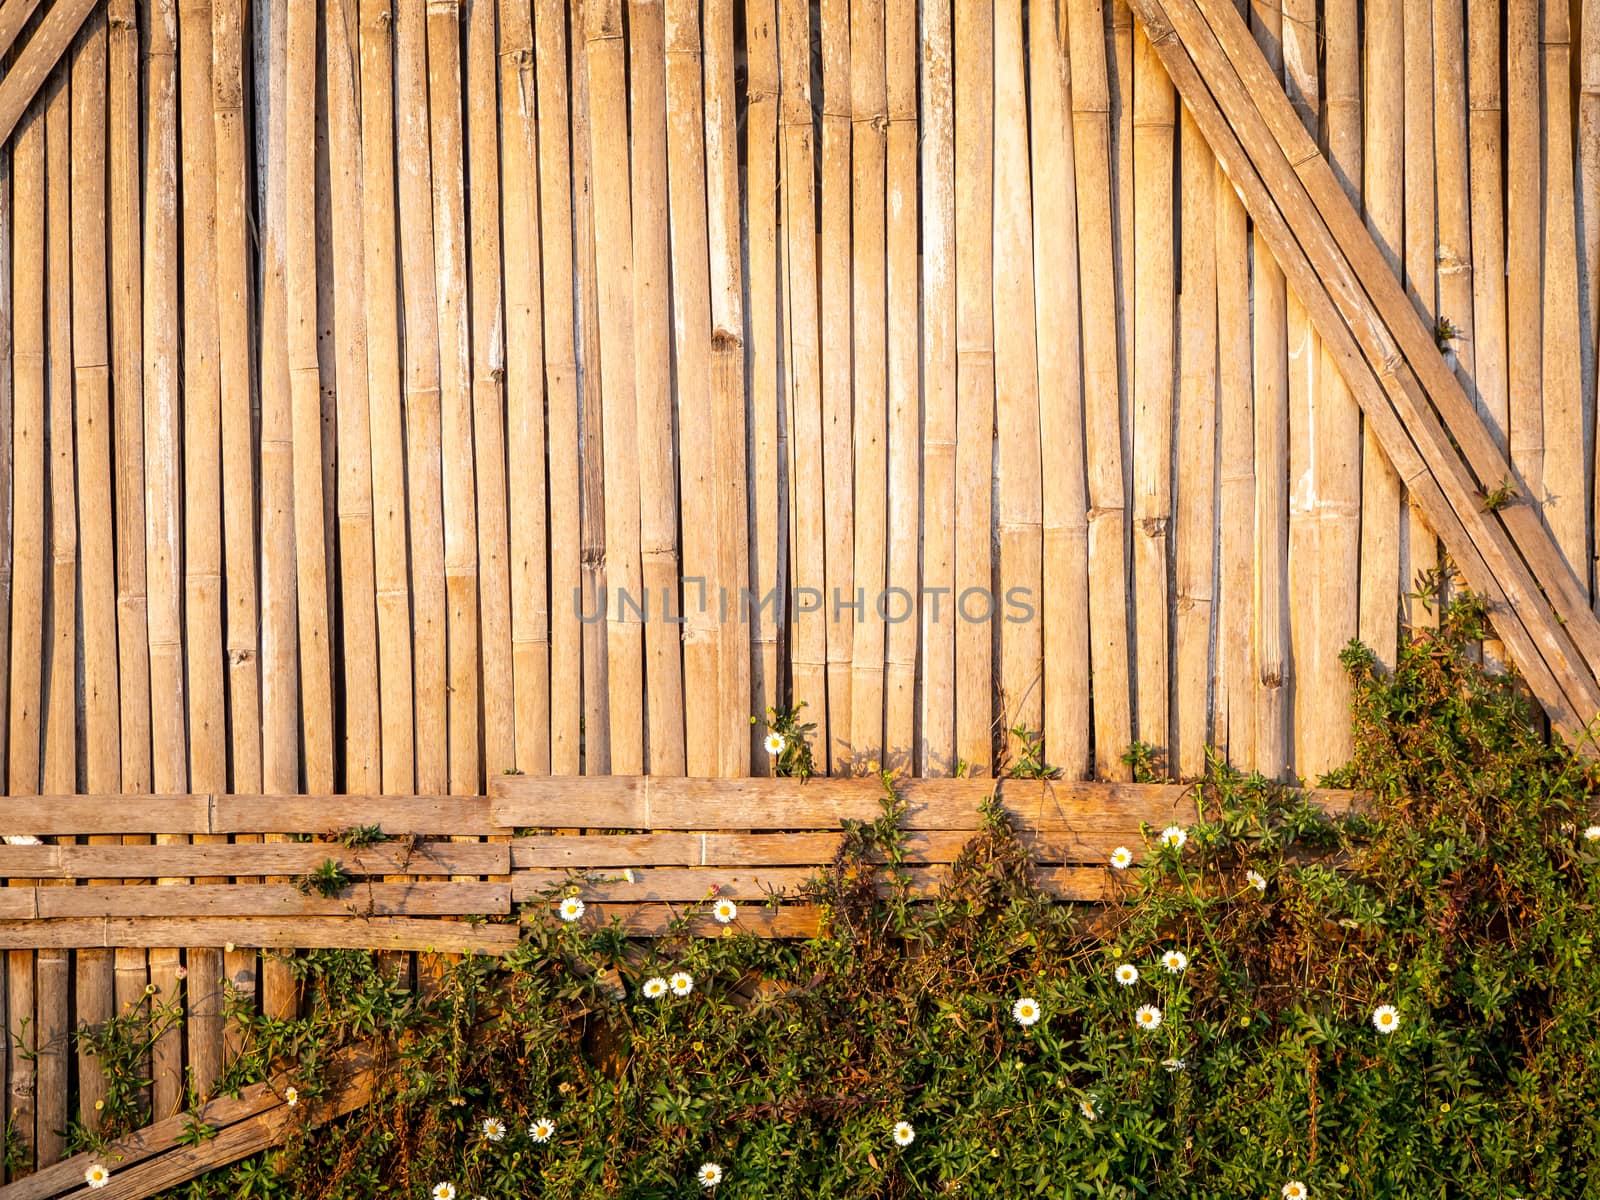 The Beautiful and natural bamboo fence or wall background